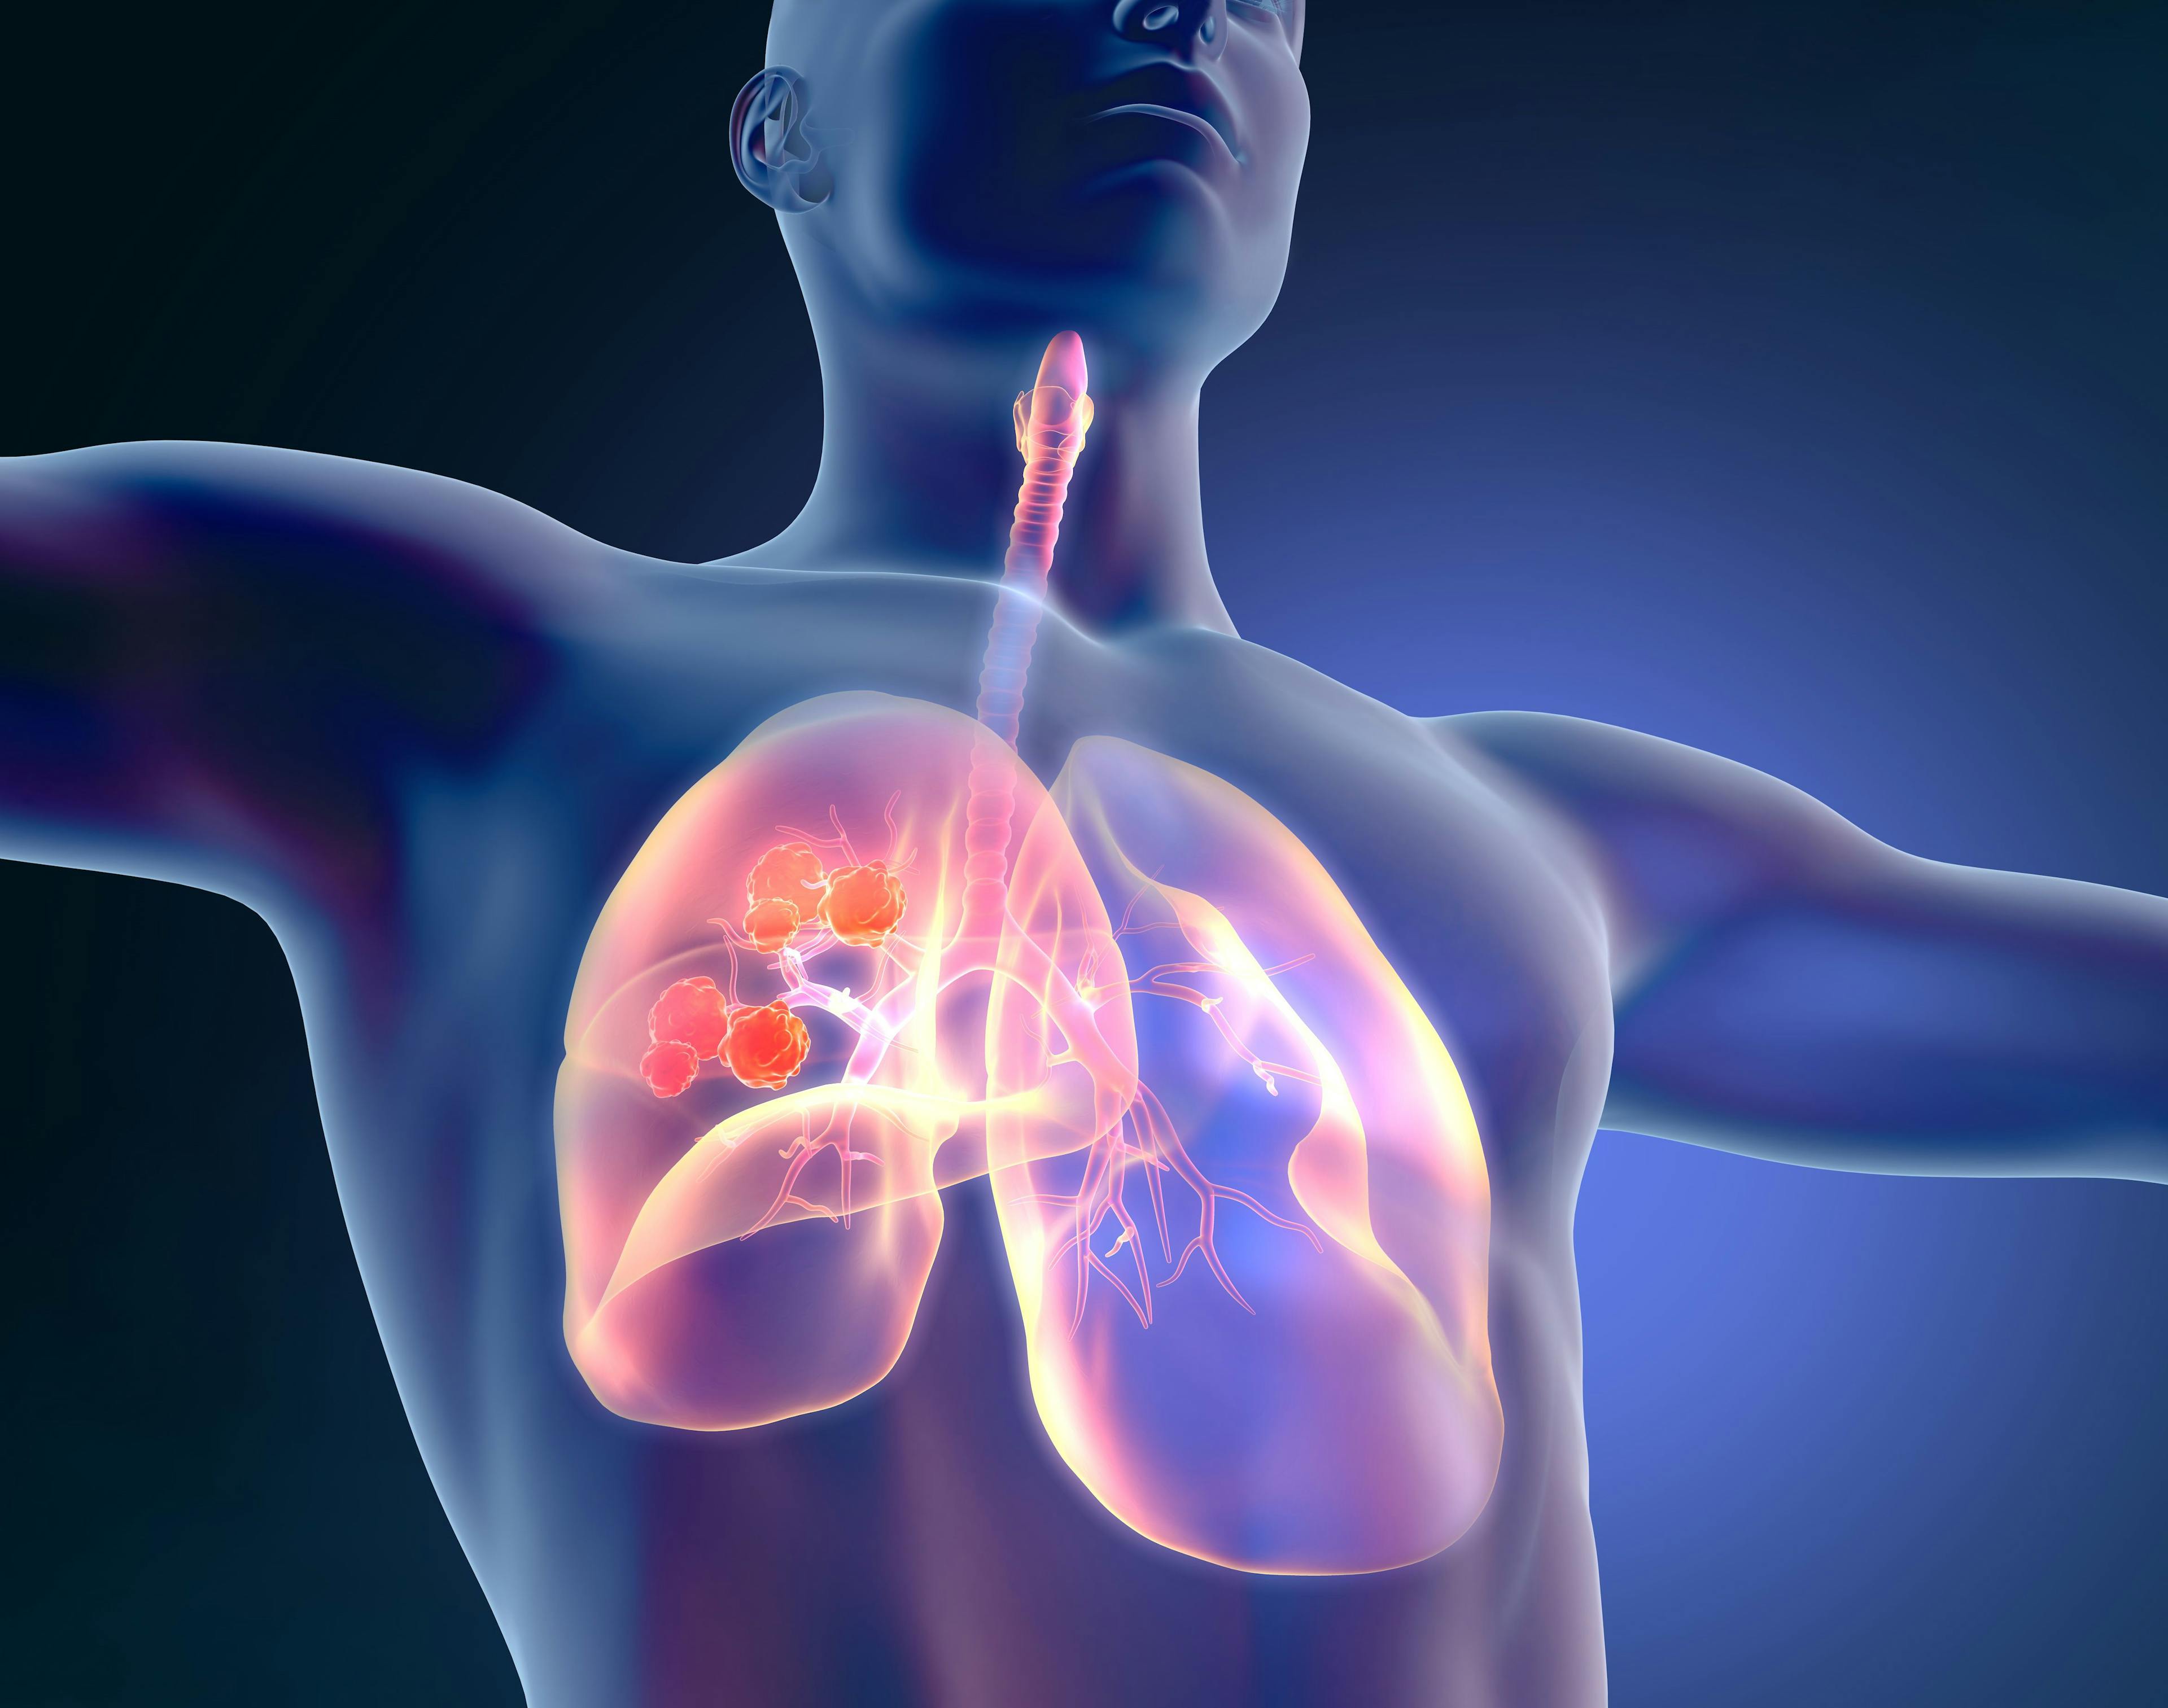 Novel Drug Bests Tagrisso in Heavily Pretreated Lung Cancer